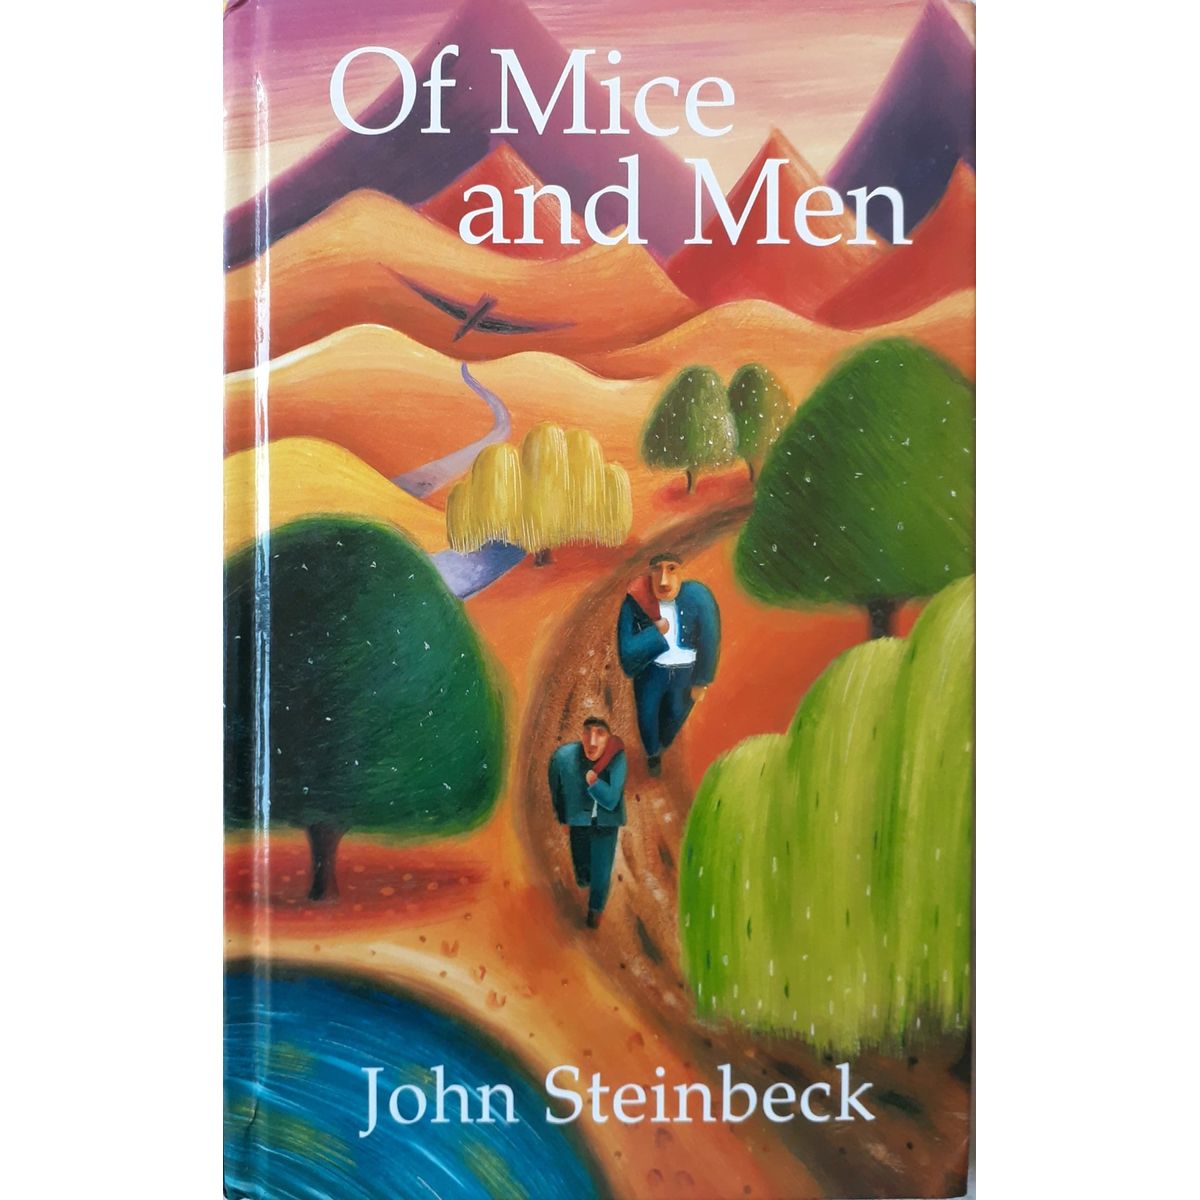 ISBN: 9780582461468 / 0582461464 - Of Mice and Men by John Steinbeck, introduction by Susan Shillinglaw [2000]